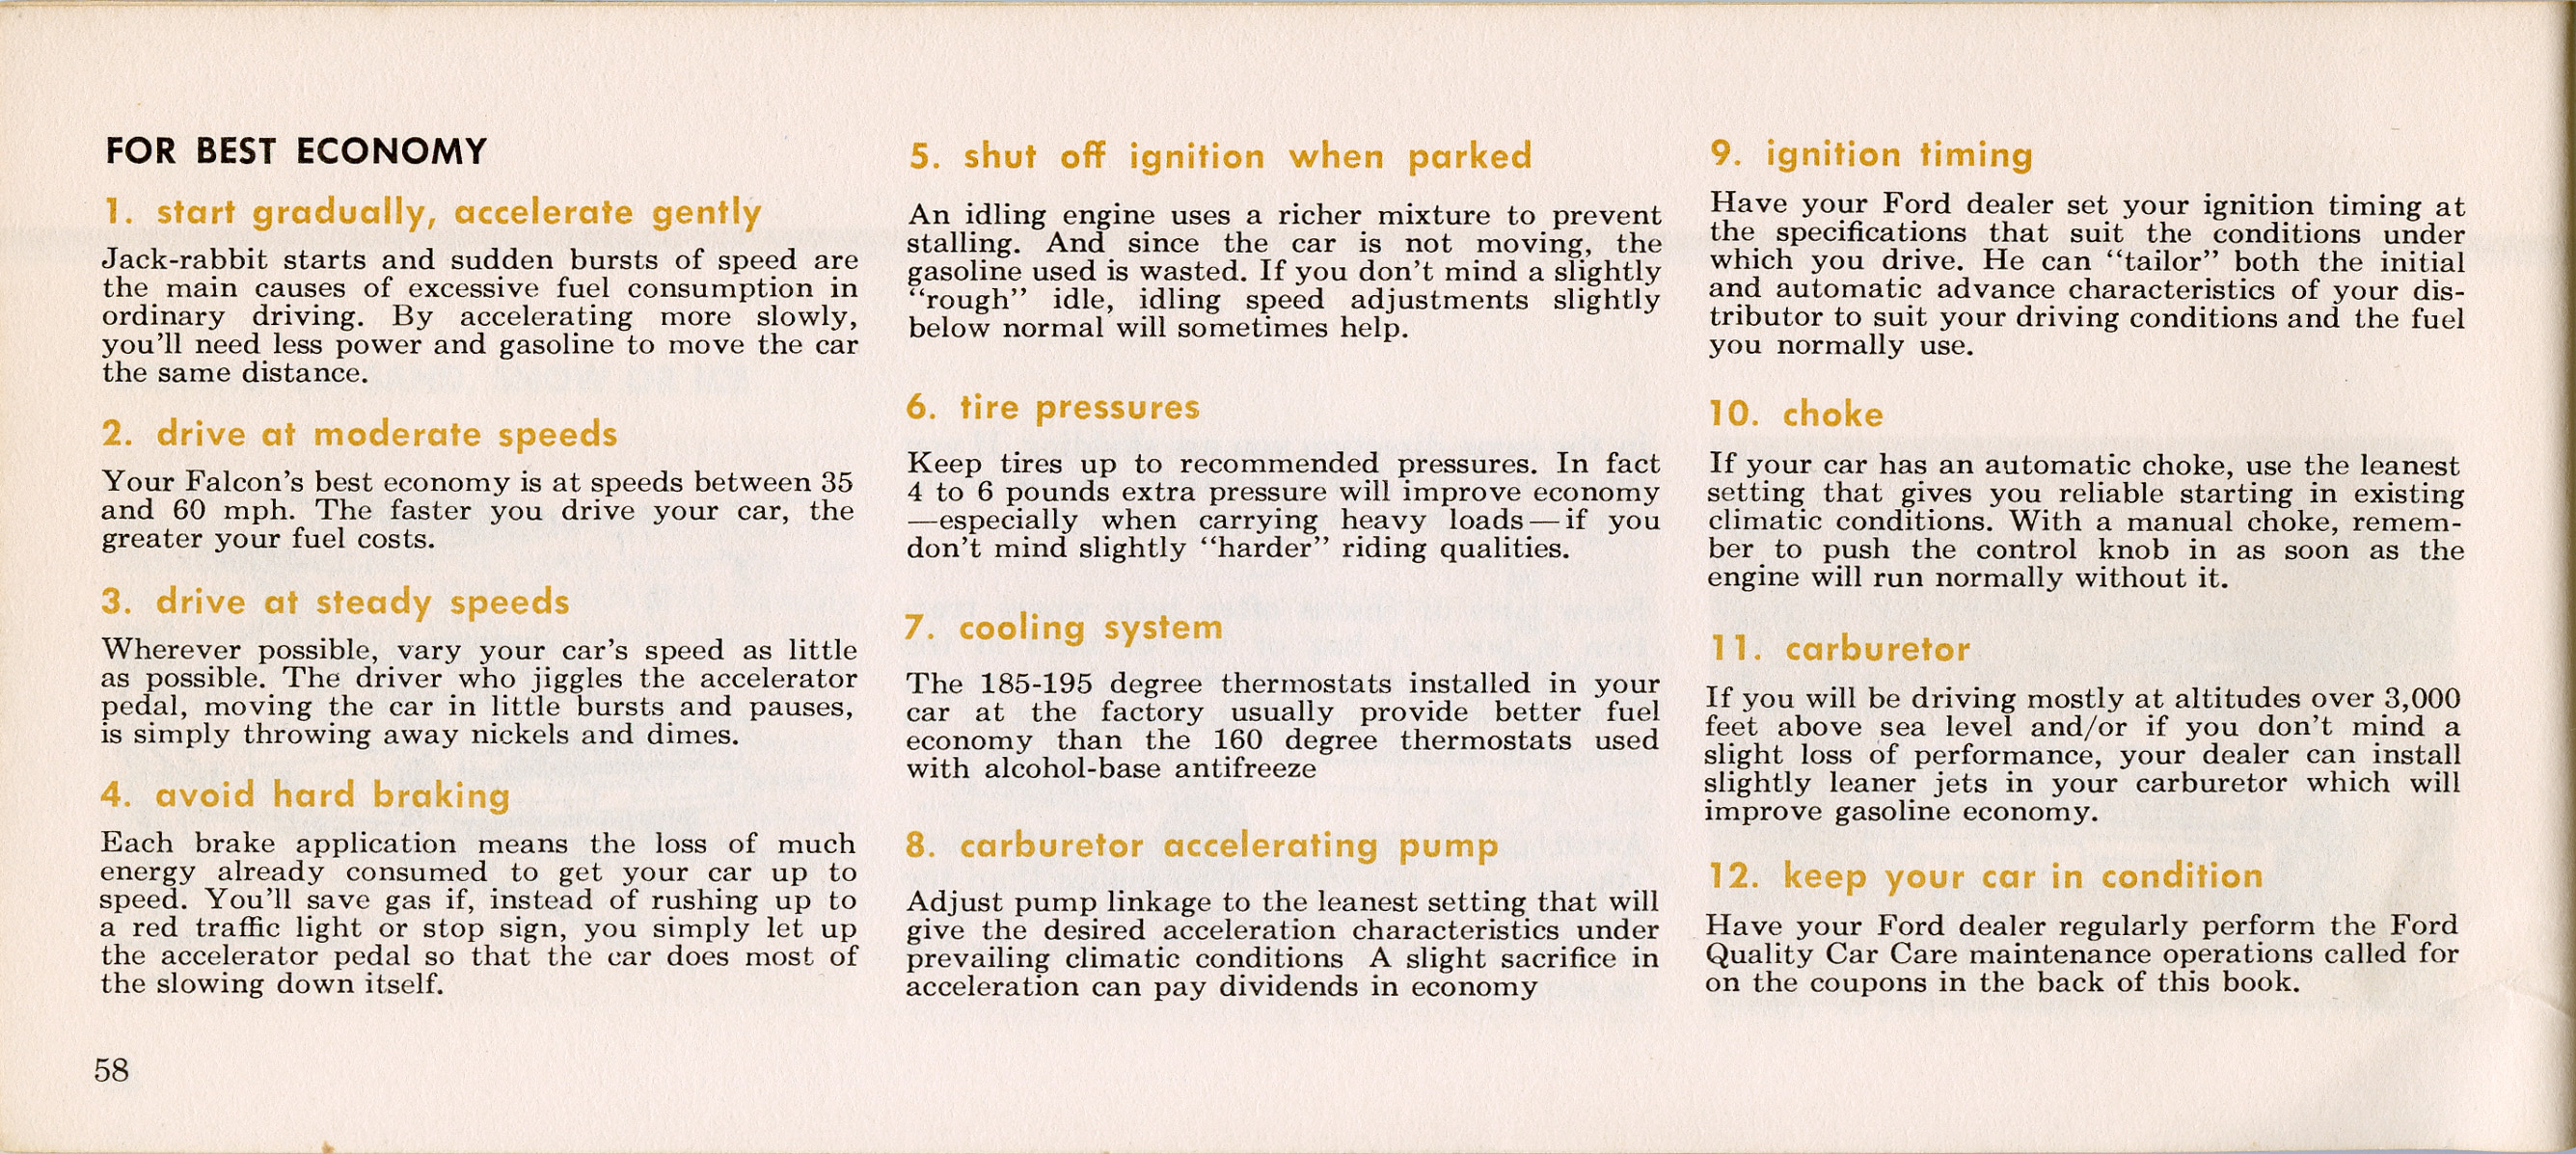 1964 Ford Falcon Owners Manual Page 10